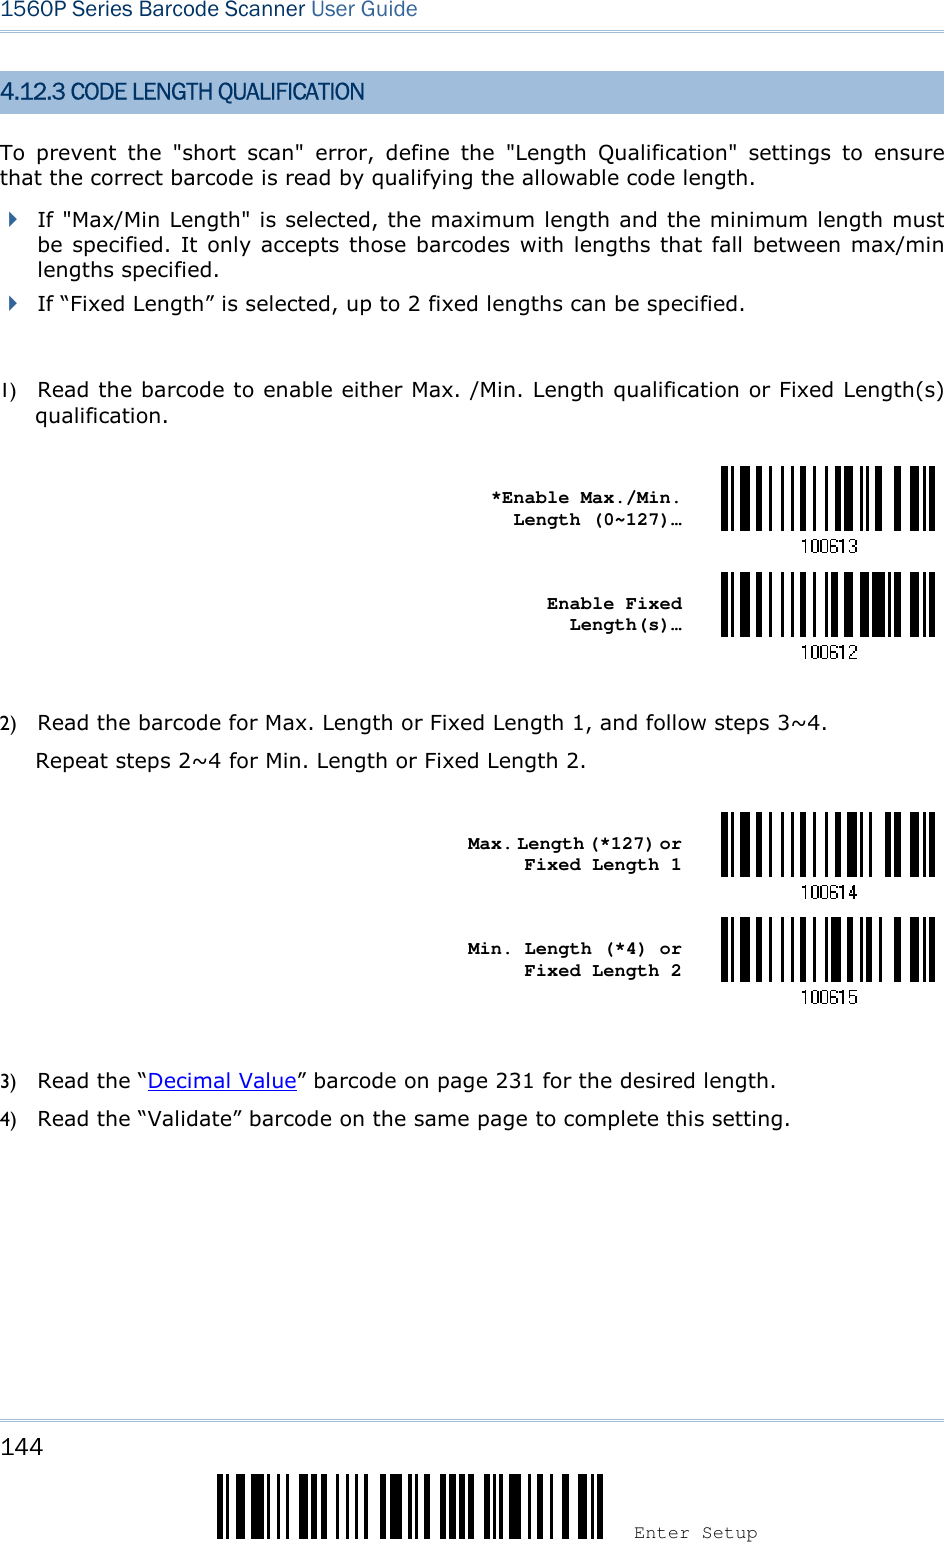 144 Enter Setup 1560P Series Barcode Scanner User Guide 4.12.3 CODE LENGTH QUALIFICATION To  prevent  the  &quot;short  scan&quot;  error,  define  the  &quot;Length  Qualification&quot;  settings  to  ensure that the correct barcode is read by qualifying the allowable code length.   If &quot;Max/Min Length&quot; is selected, the maximum length and the minimum length mustbe specified. It only accepts those barcodes with lengths that fall between max/minlengths specified.If “Fixed Length” is selected, up to 2 fixed lengths can be specified.1) Read the barcode to enable either Max. /Min. Length qualification or Fixed Length(s)qualification.*Enable Max./Min.Length (0~127)… Enable Fixed Length(s)… 2) Read the barcode for Max. Length or Fixed Length 1, and follow steps 3~4.Repeat steps 2~4 for Min. Length or Fixed Length 2.Max. Length (*127) or Fixed Length 1 Min. Length (*4) or Fixed Length 2 3) Read the “Decimal Value” barcode on page 231 for the desired length.4) Read the “Validate” barcode on the same page to complete this setting.